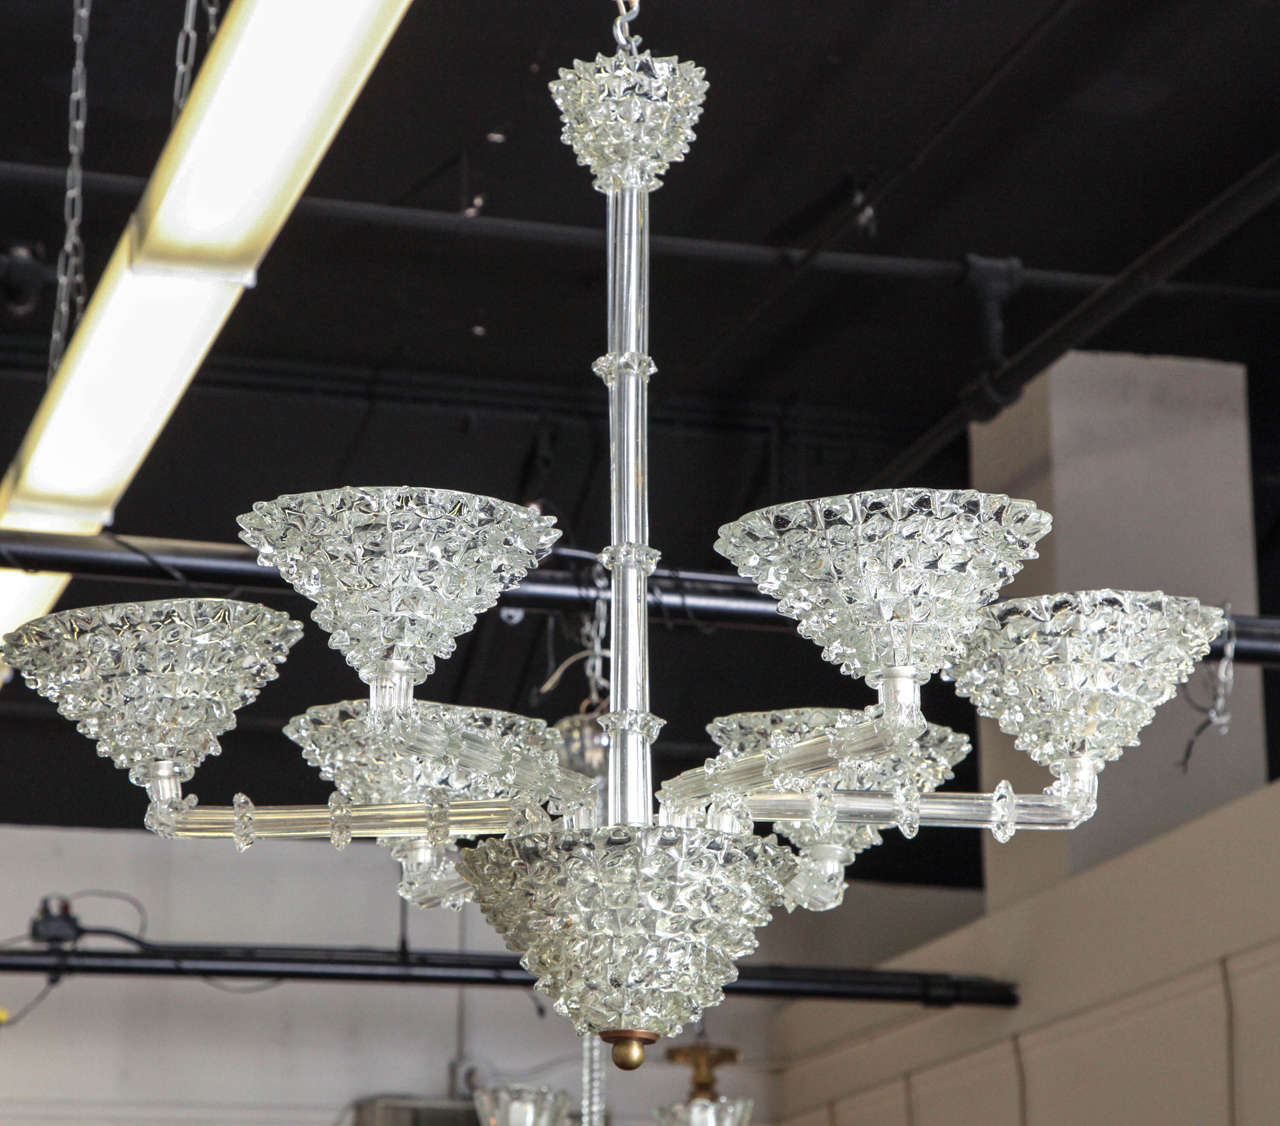 Mid-20th Century Barovier Toso Chandelier Made in Venice